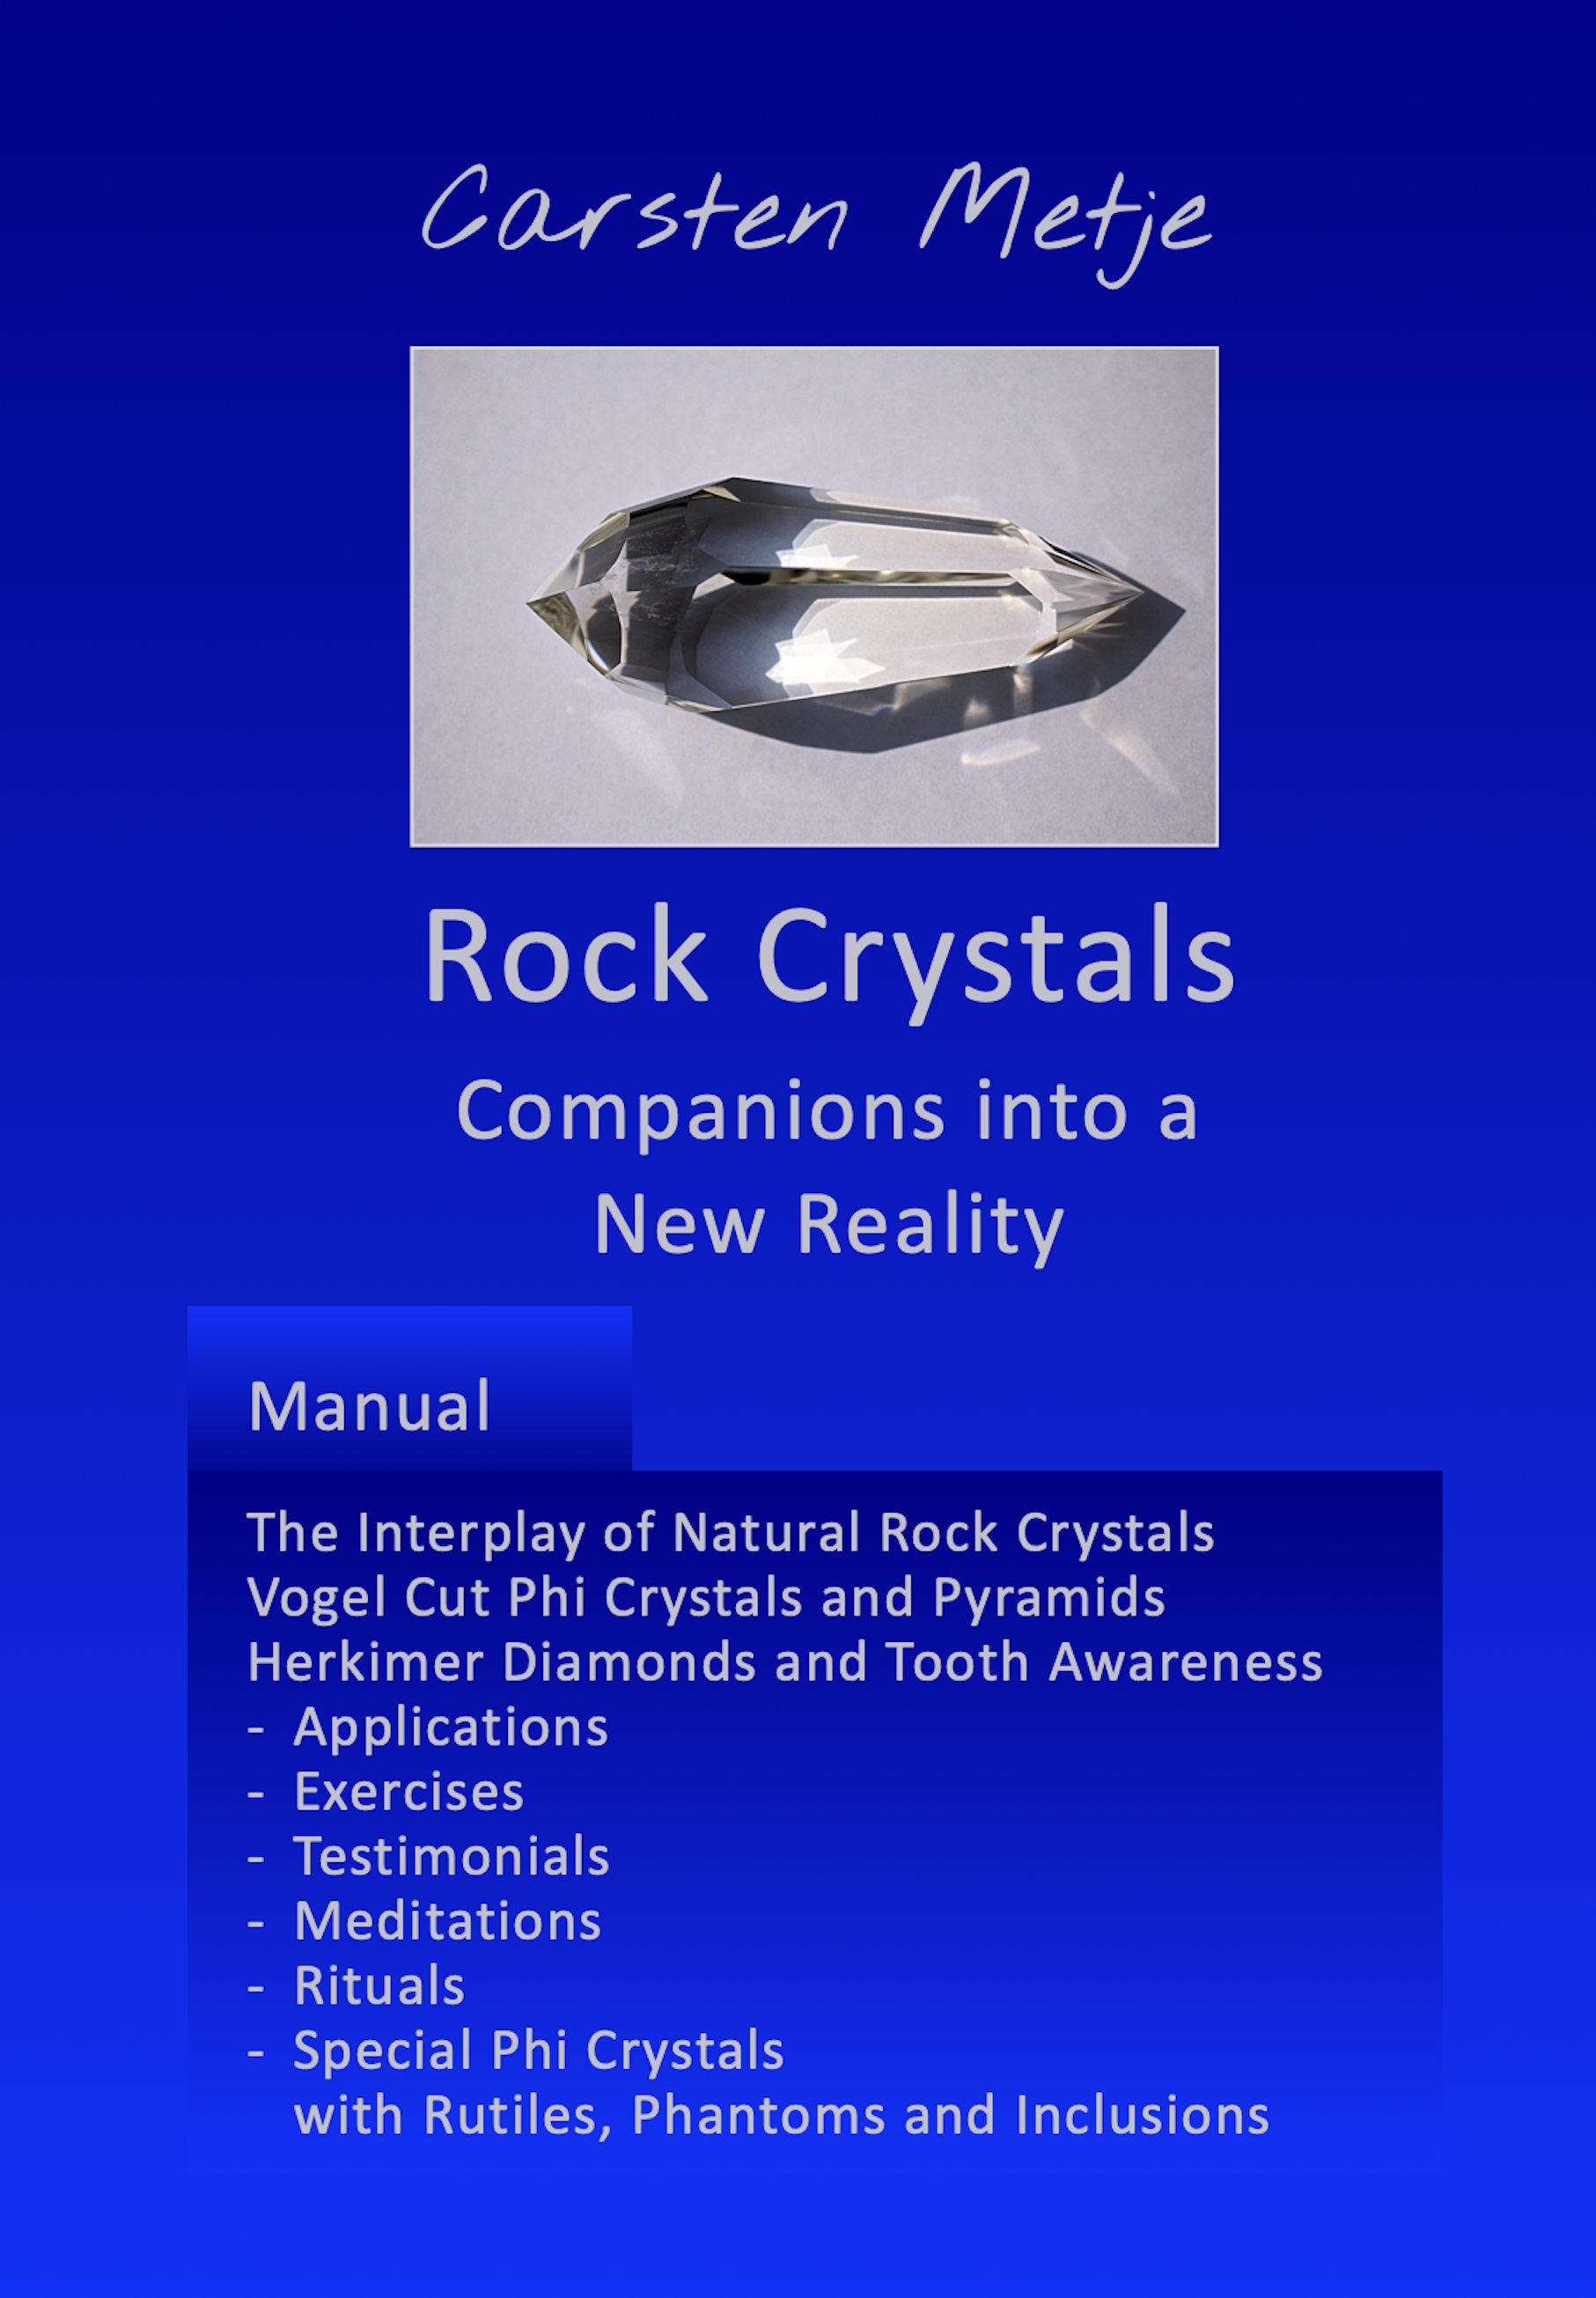 Rock Crystals - Companions into a new reality